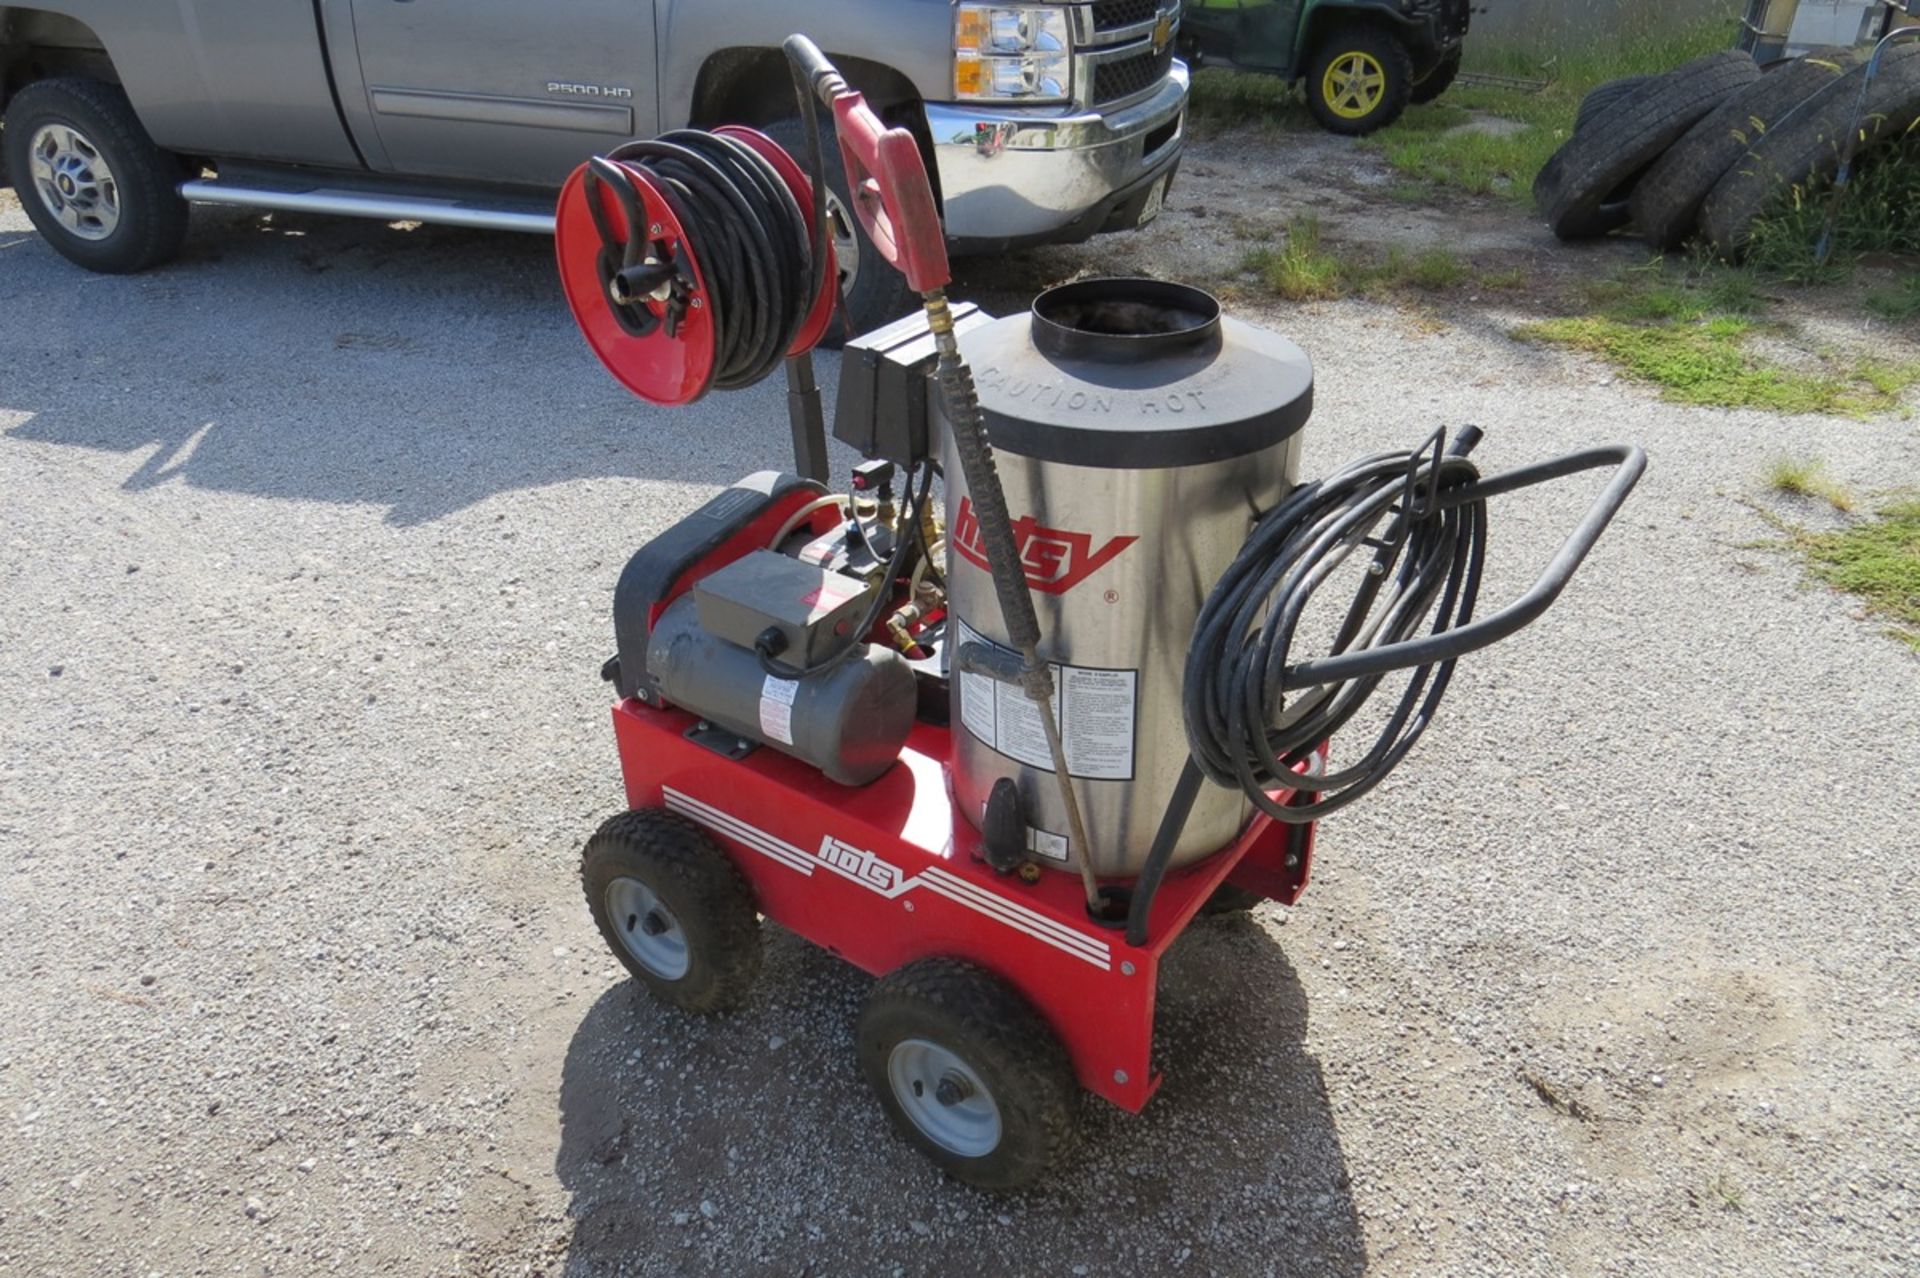 Hotsy Model 795SS SS Portable Hot Water Pressure Washer, SN# 11090390-163836, 2000 PSI, 3.5 Gallon/ - Image 5 of 5